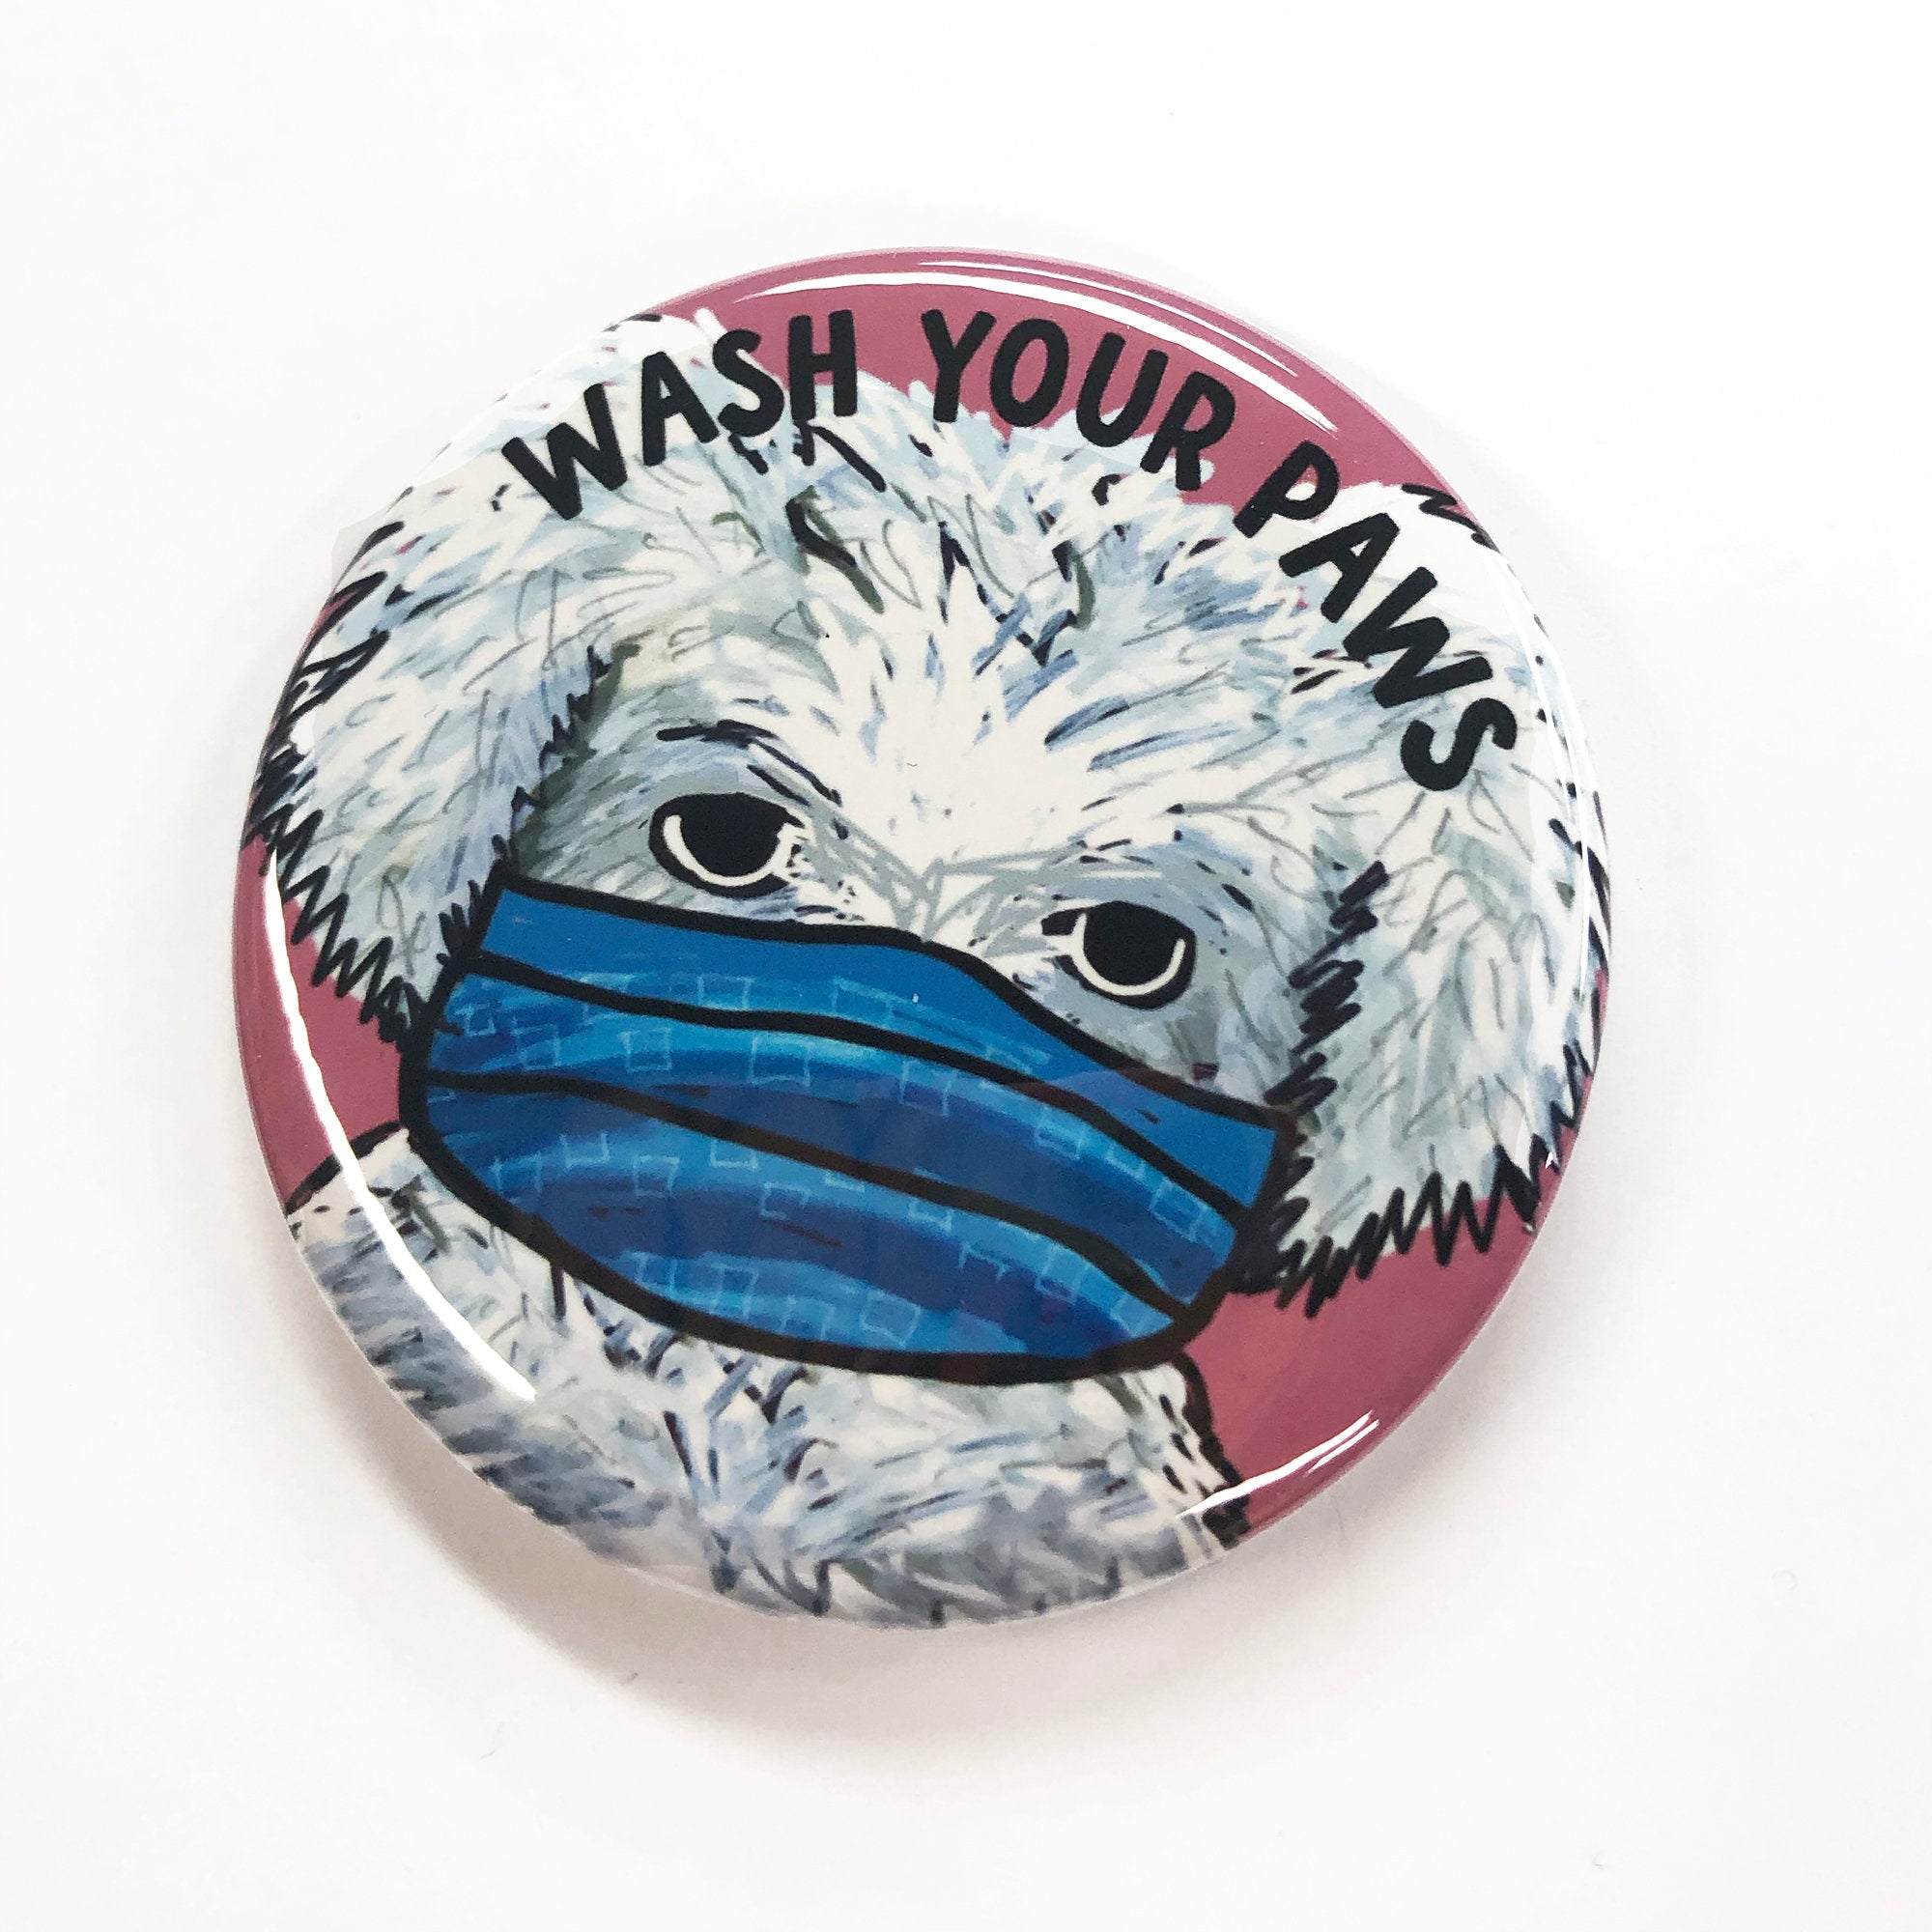 Wash Your Paws Pin or Magnet - Wash Your Hands